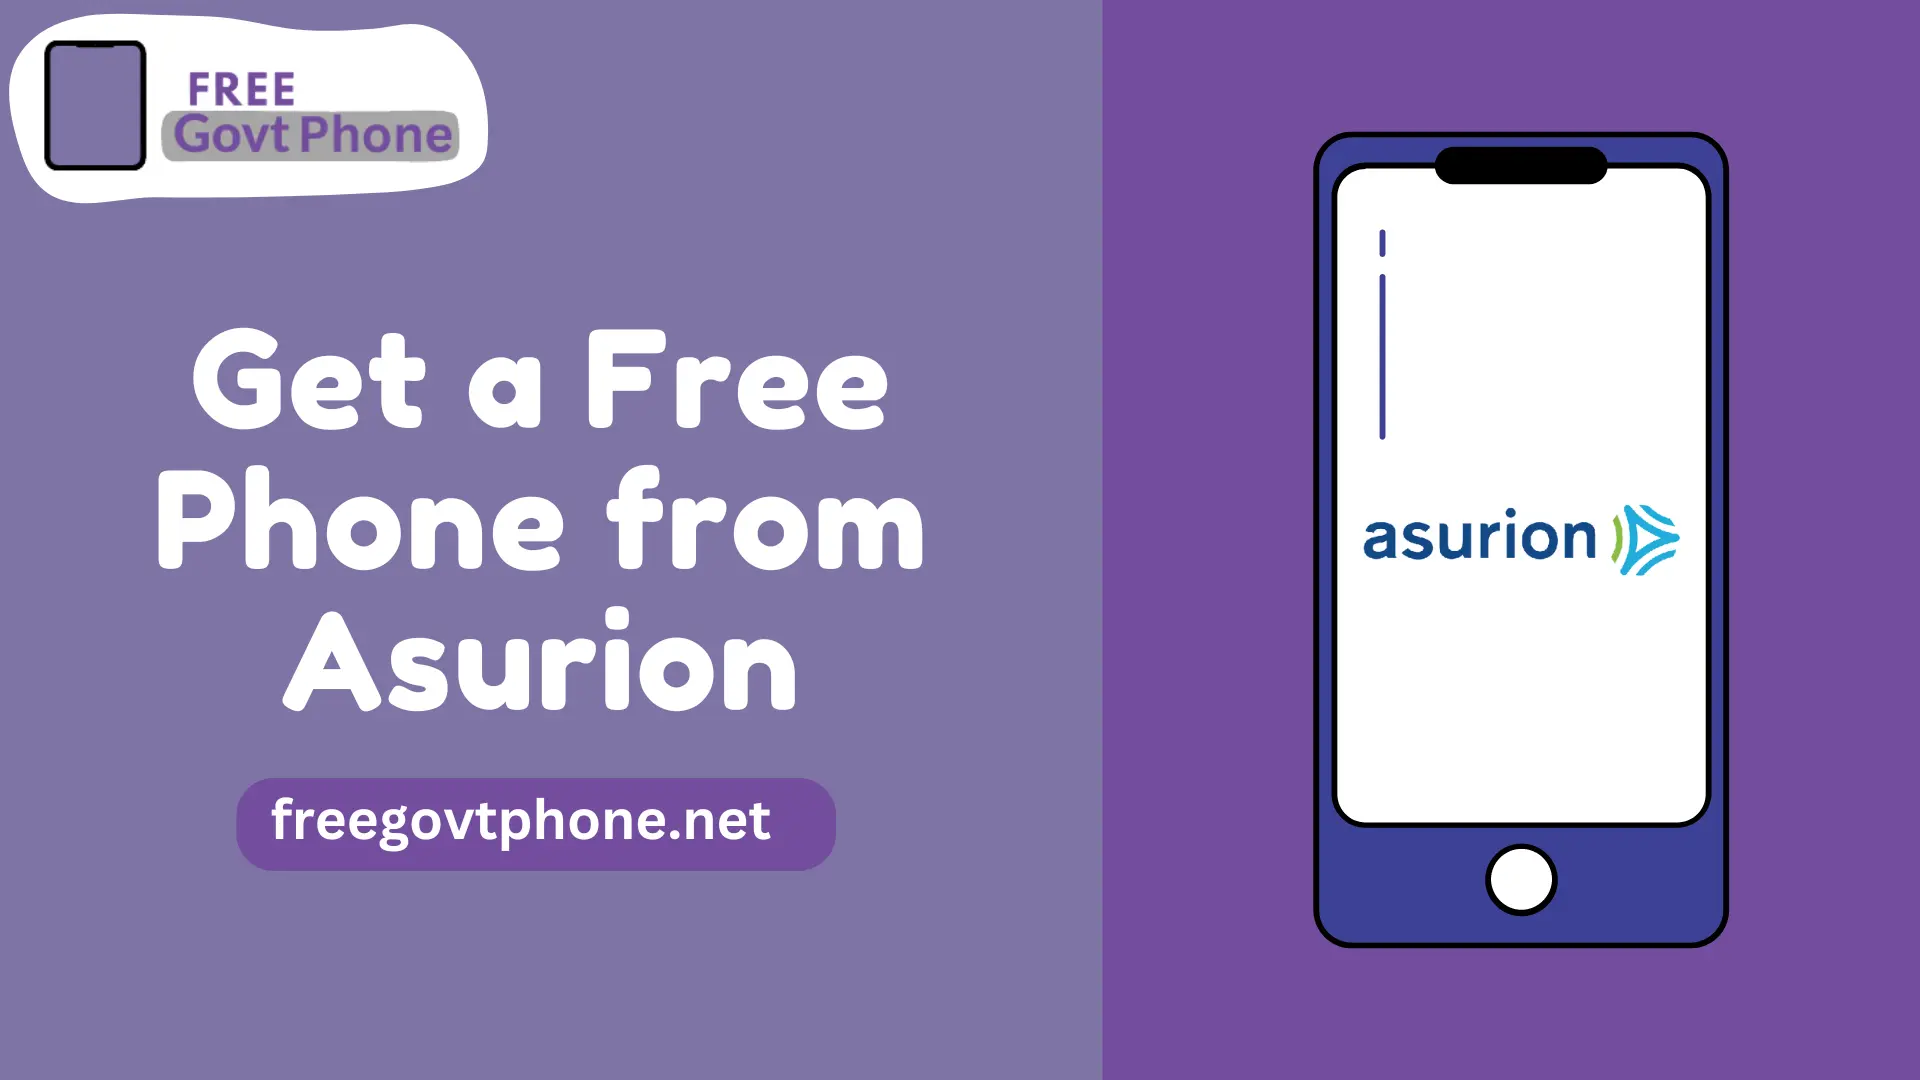 How to Get a Free Phone from Asurion